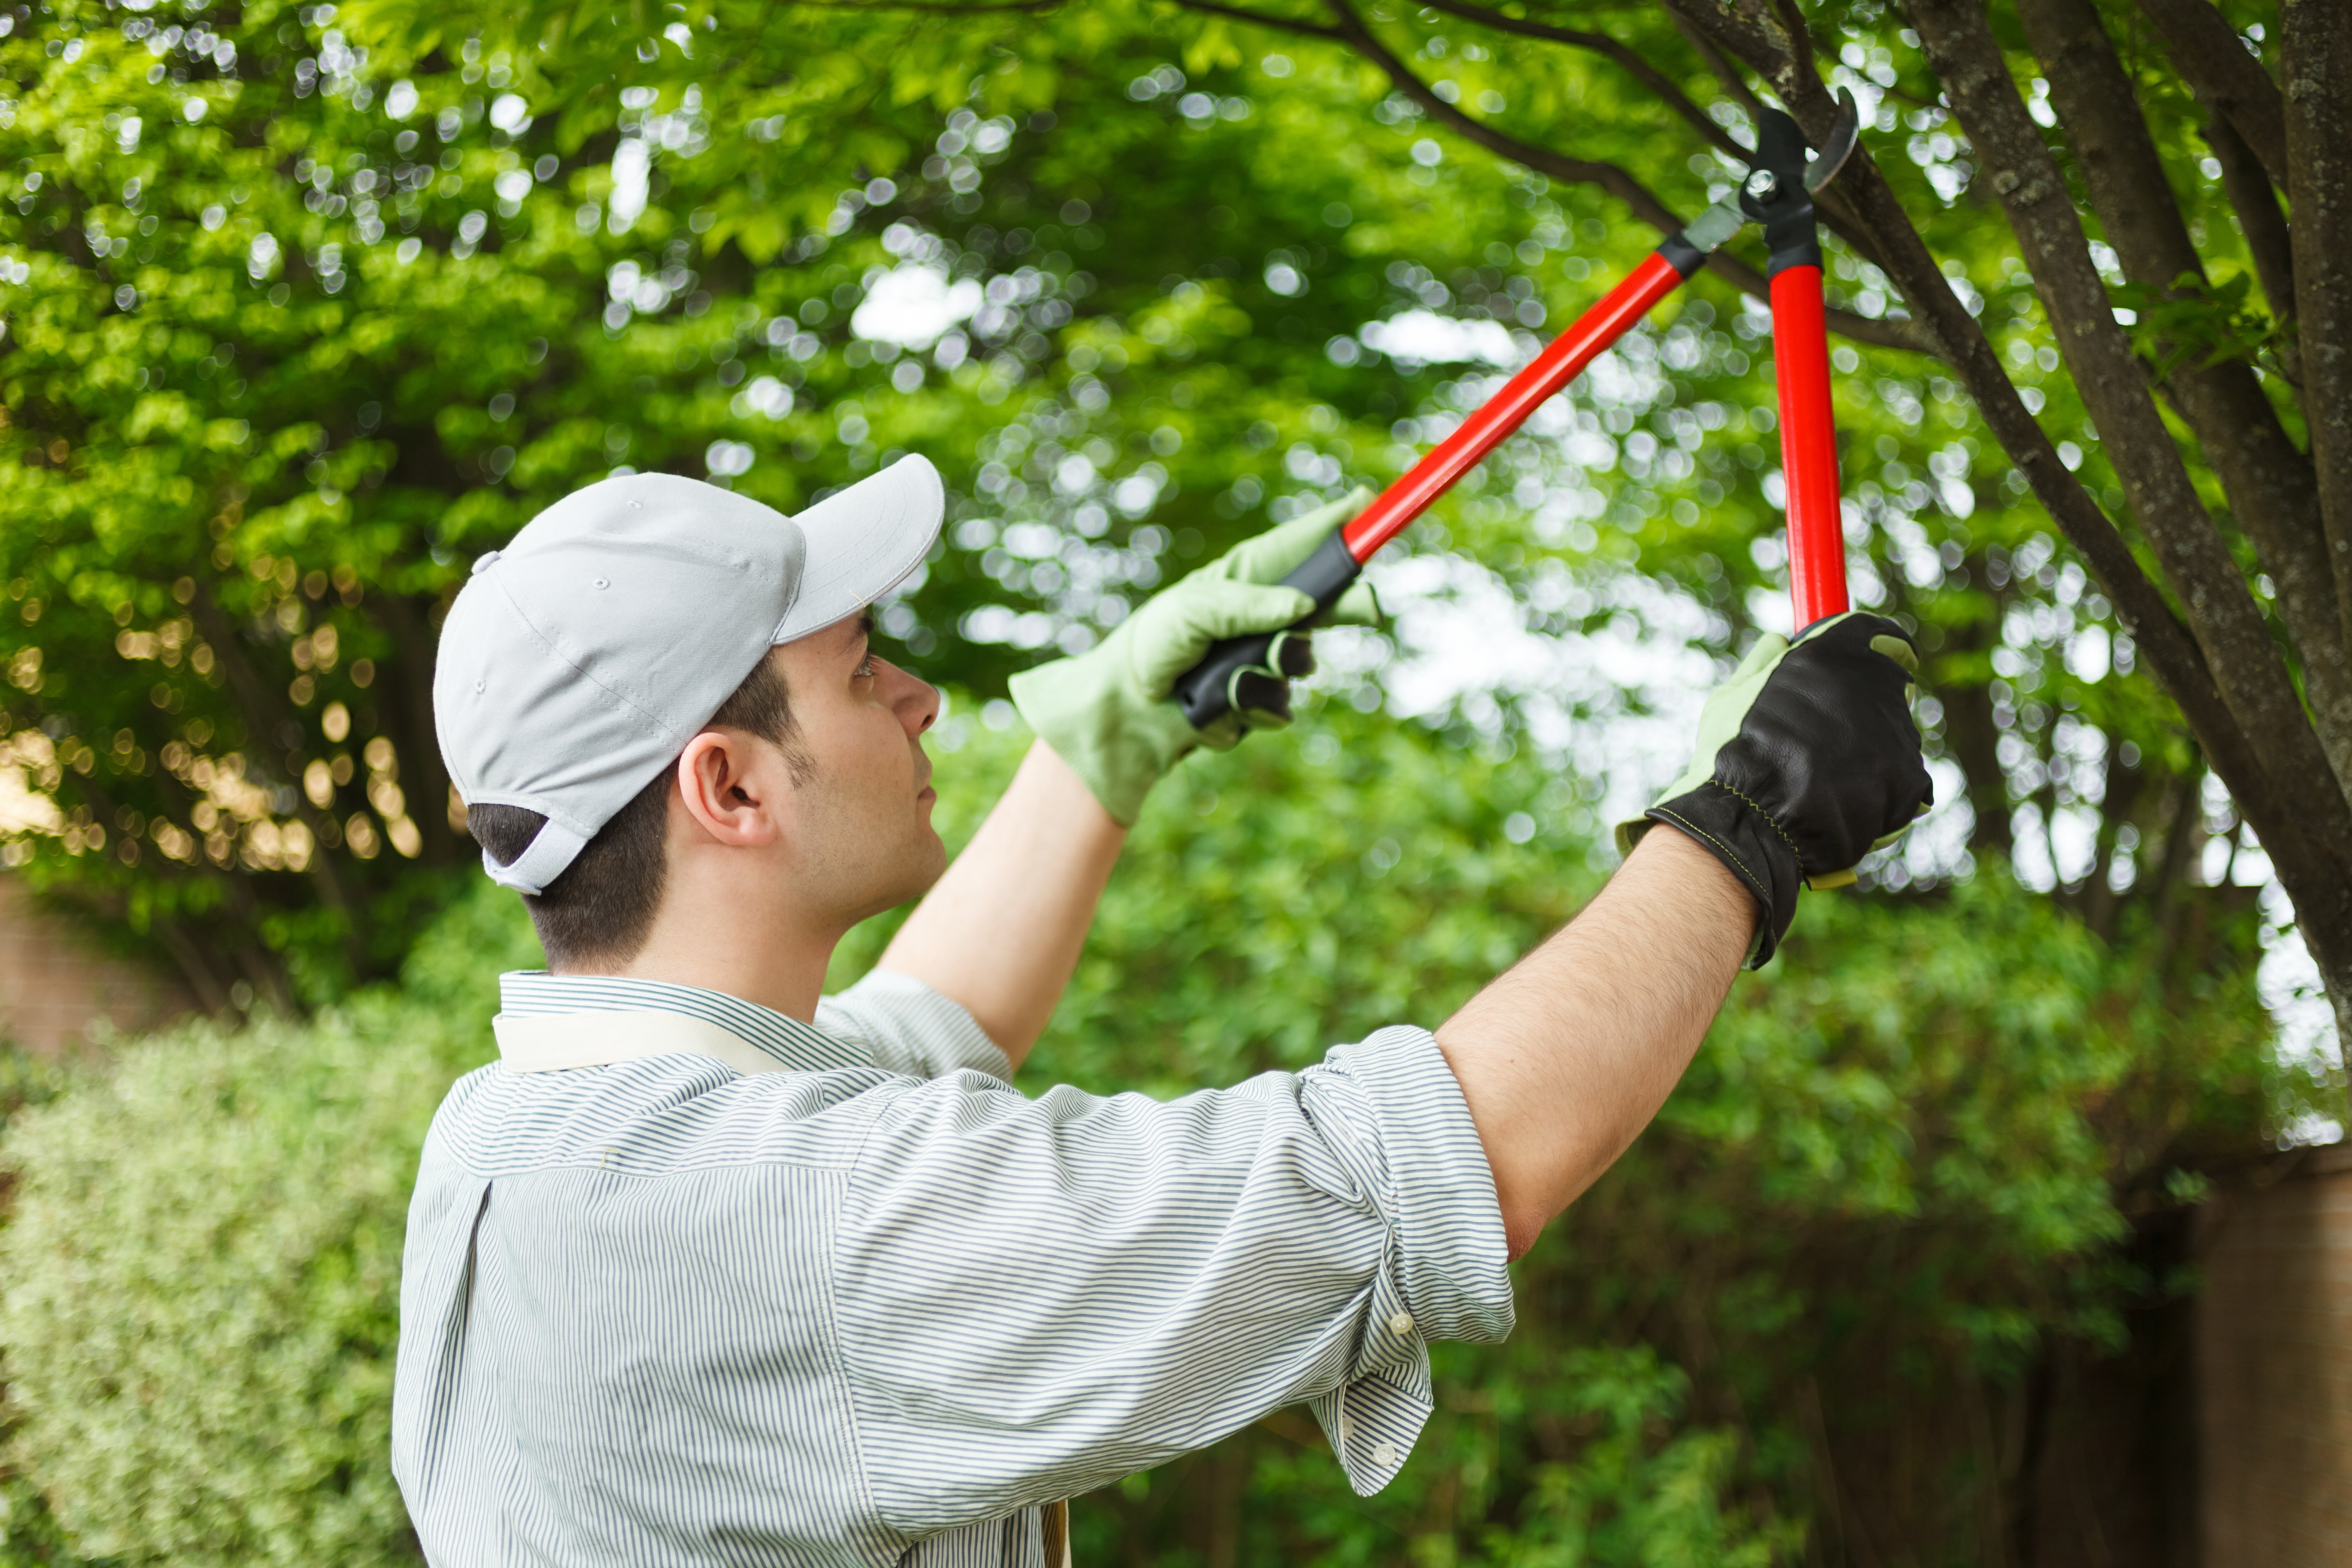 Tree Trimming and Maintenance: Common HOA Tree Policy Questions